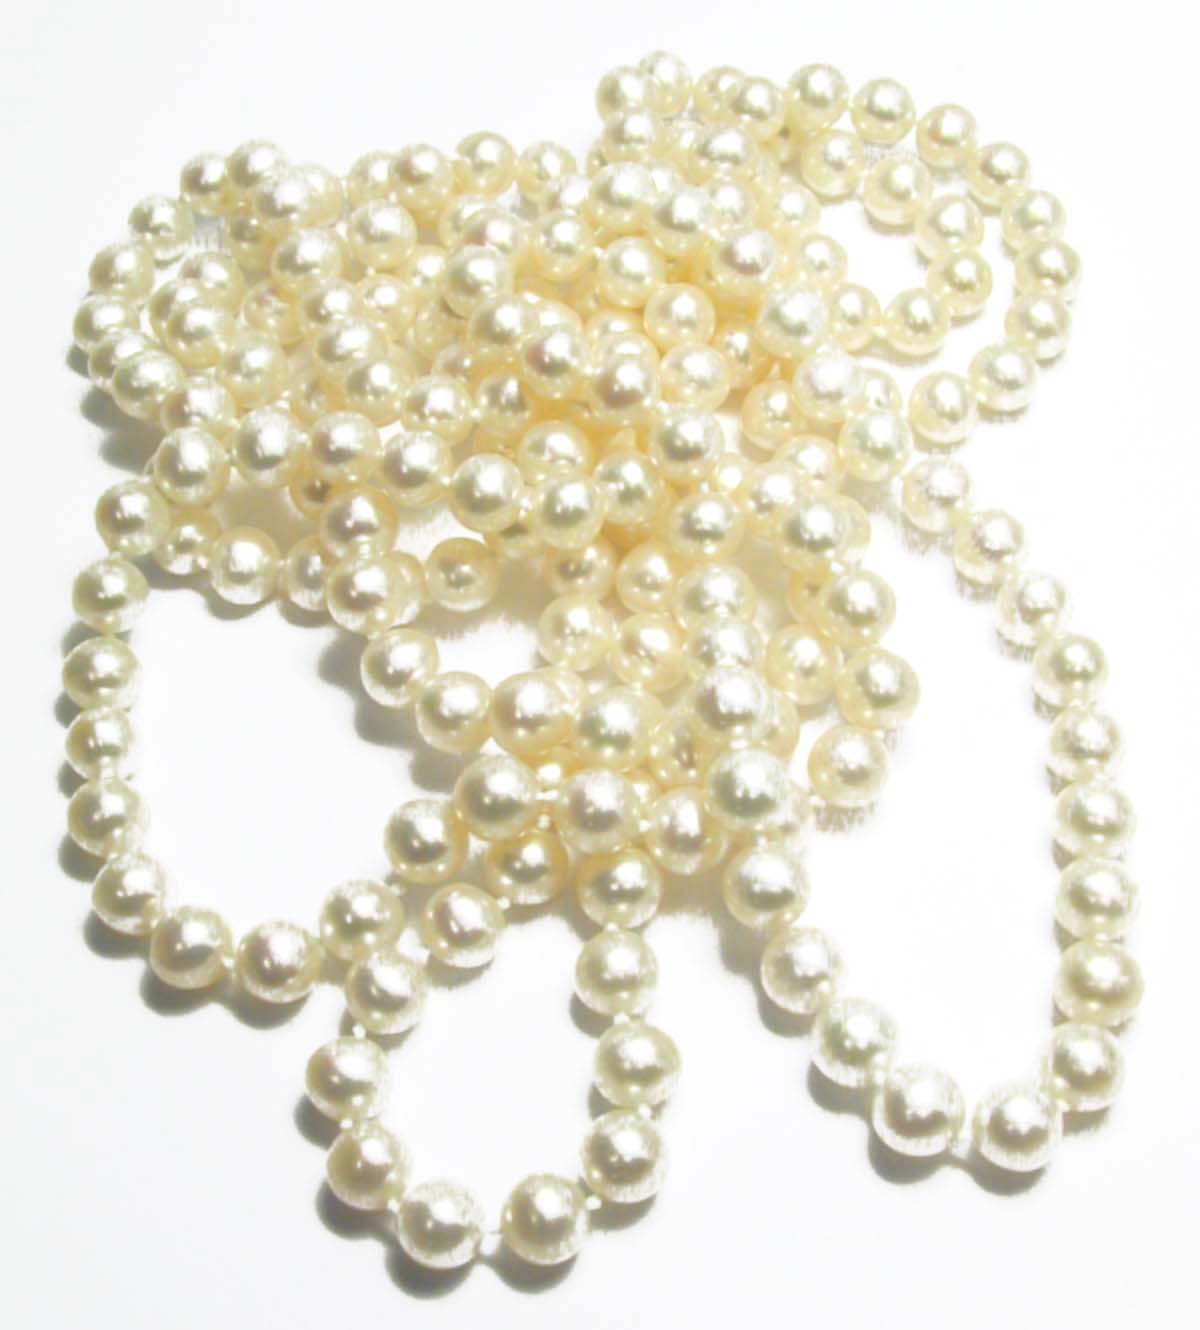 
60 Inch White Freshwater Cultured Pearl Strand
